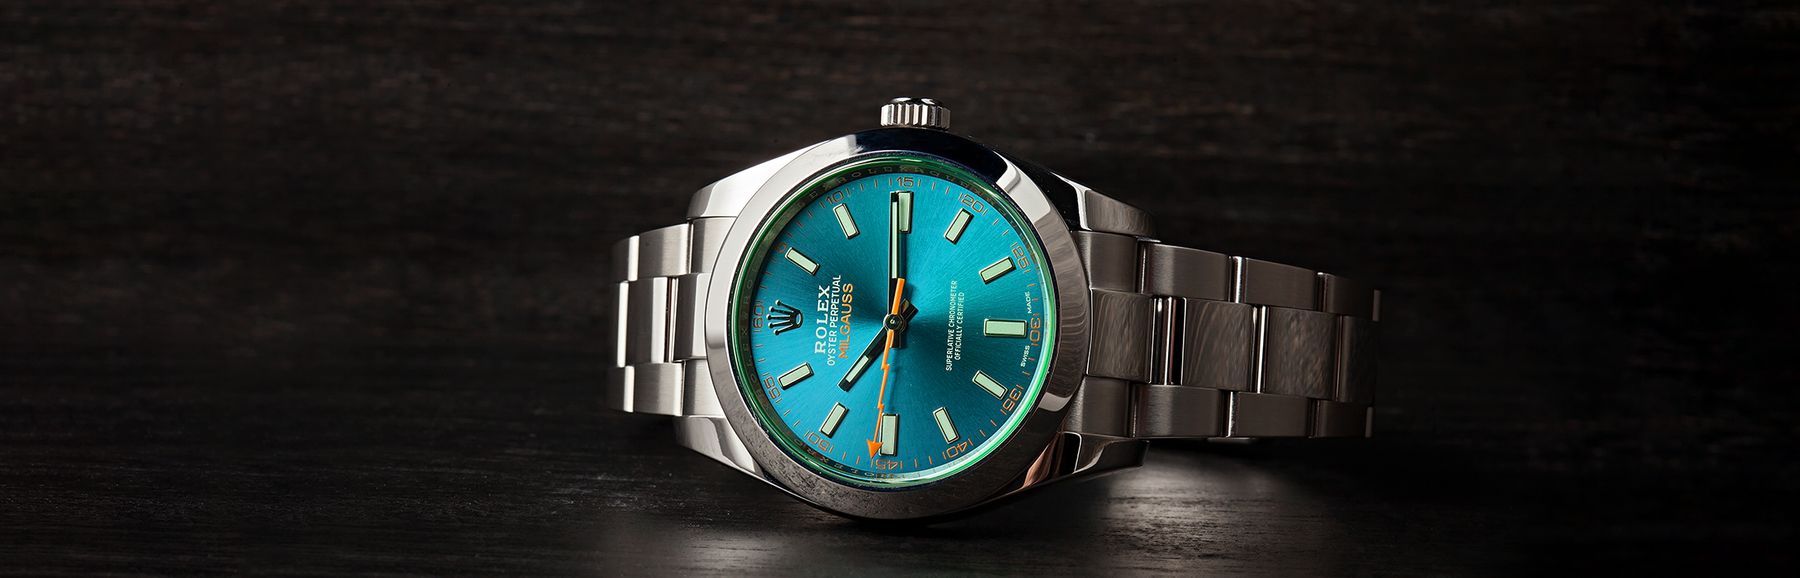 How to Buy a Rolex Watch – The Ultimate Guide